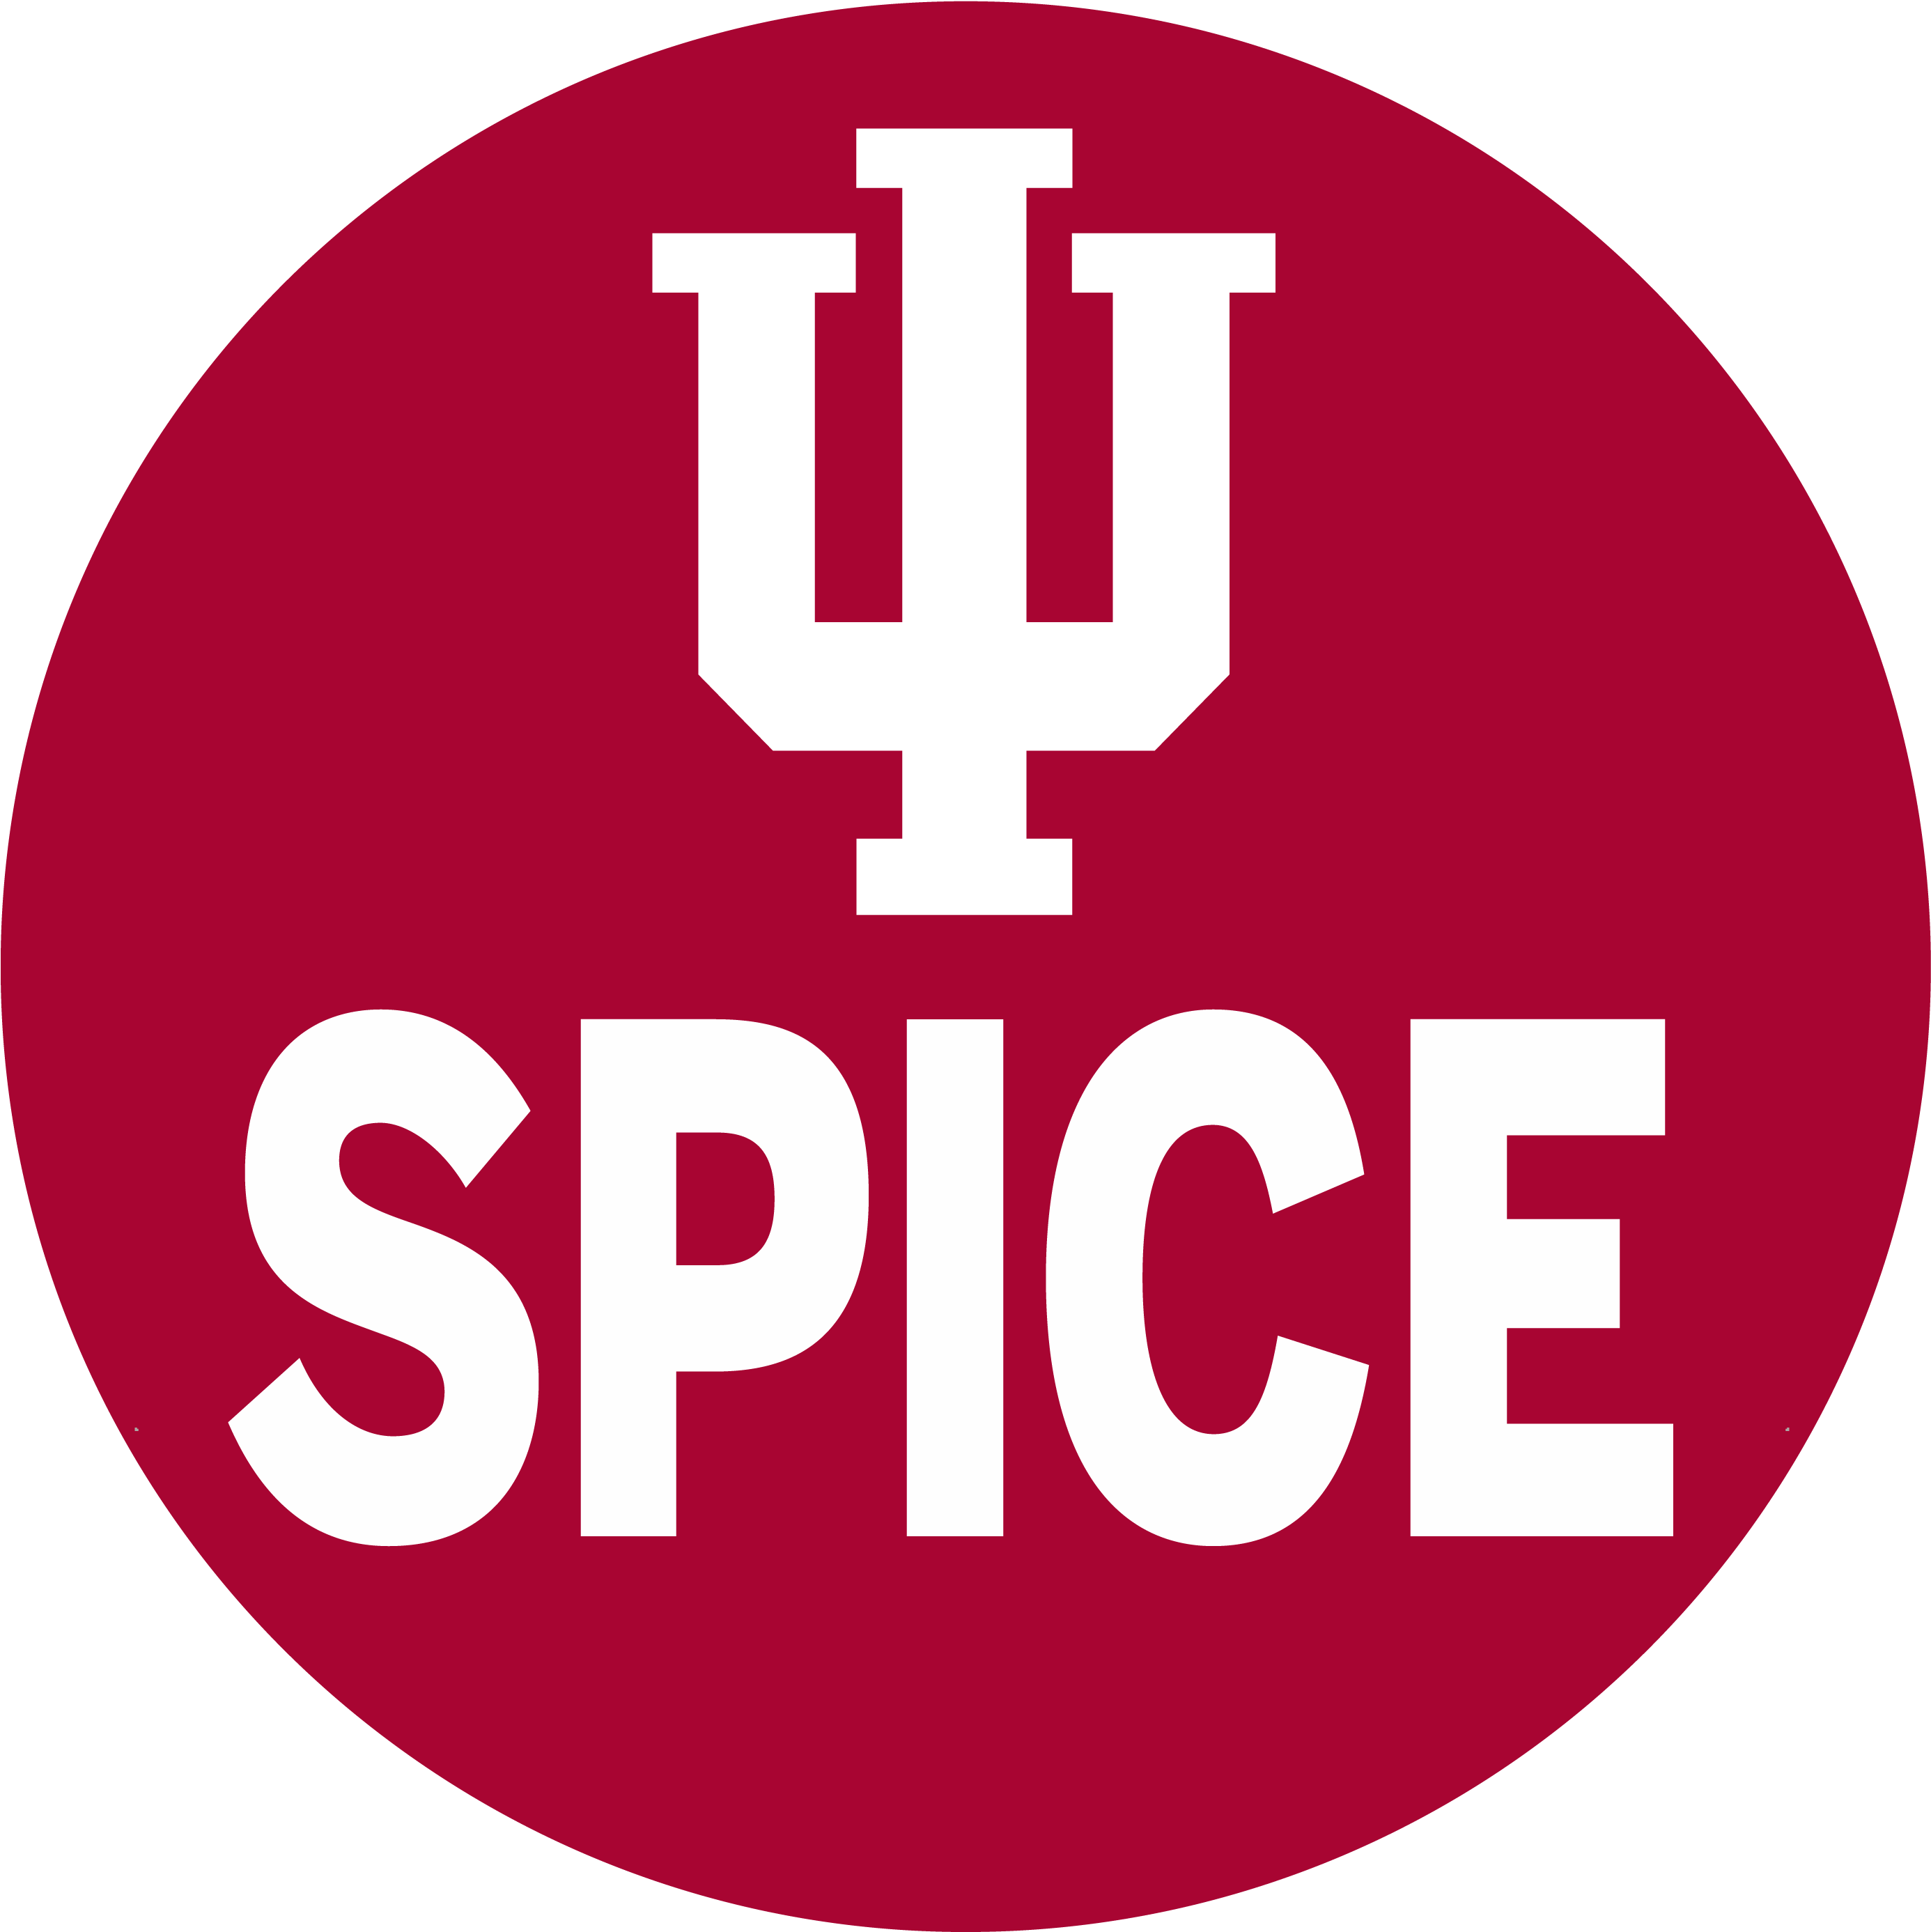 The Association Also Sponsors Or Co-sponsors Nearly - Boelter Brands Indiana Hoosiers 4 Pack Neoprene Coaster (2816x2840)